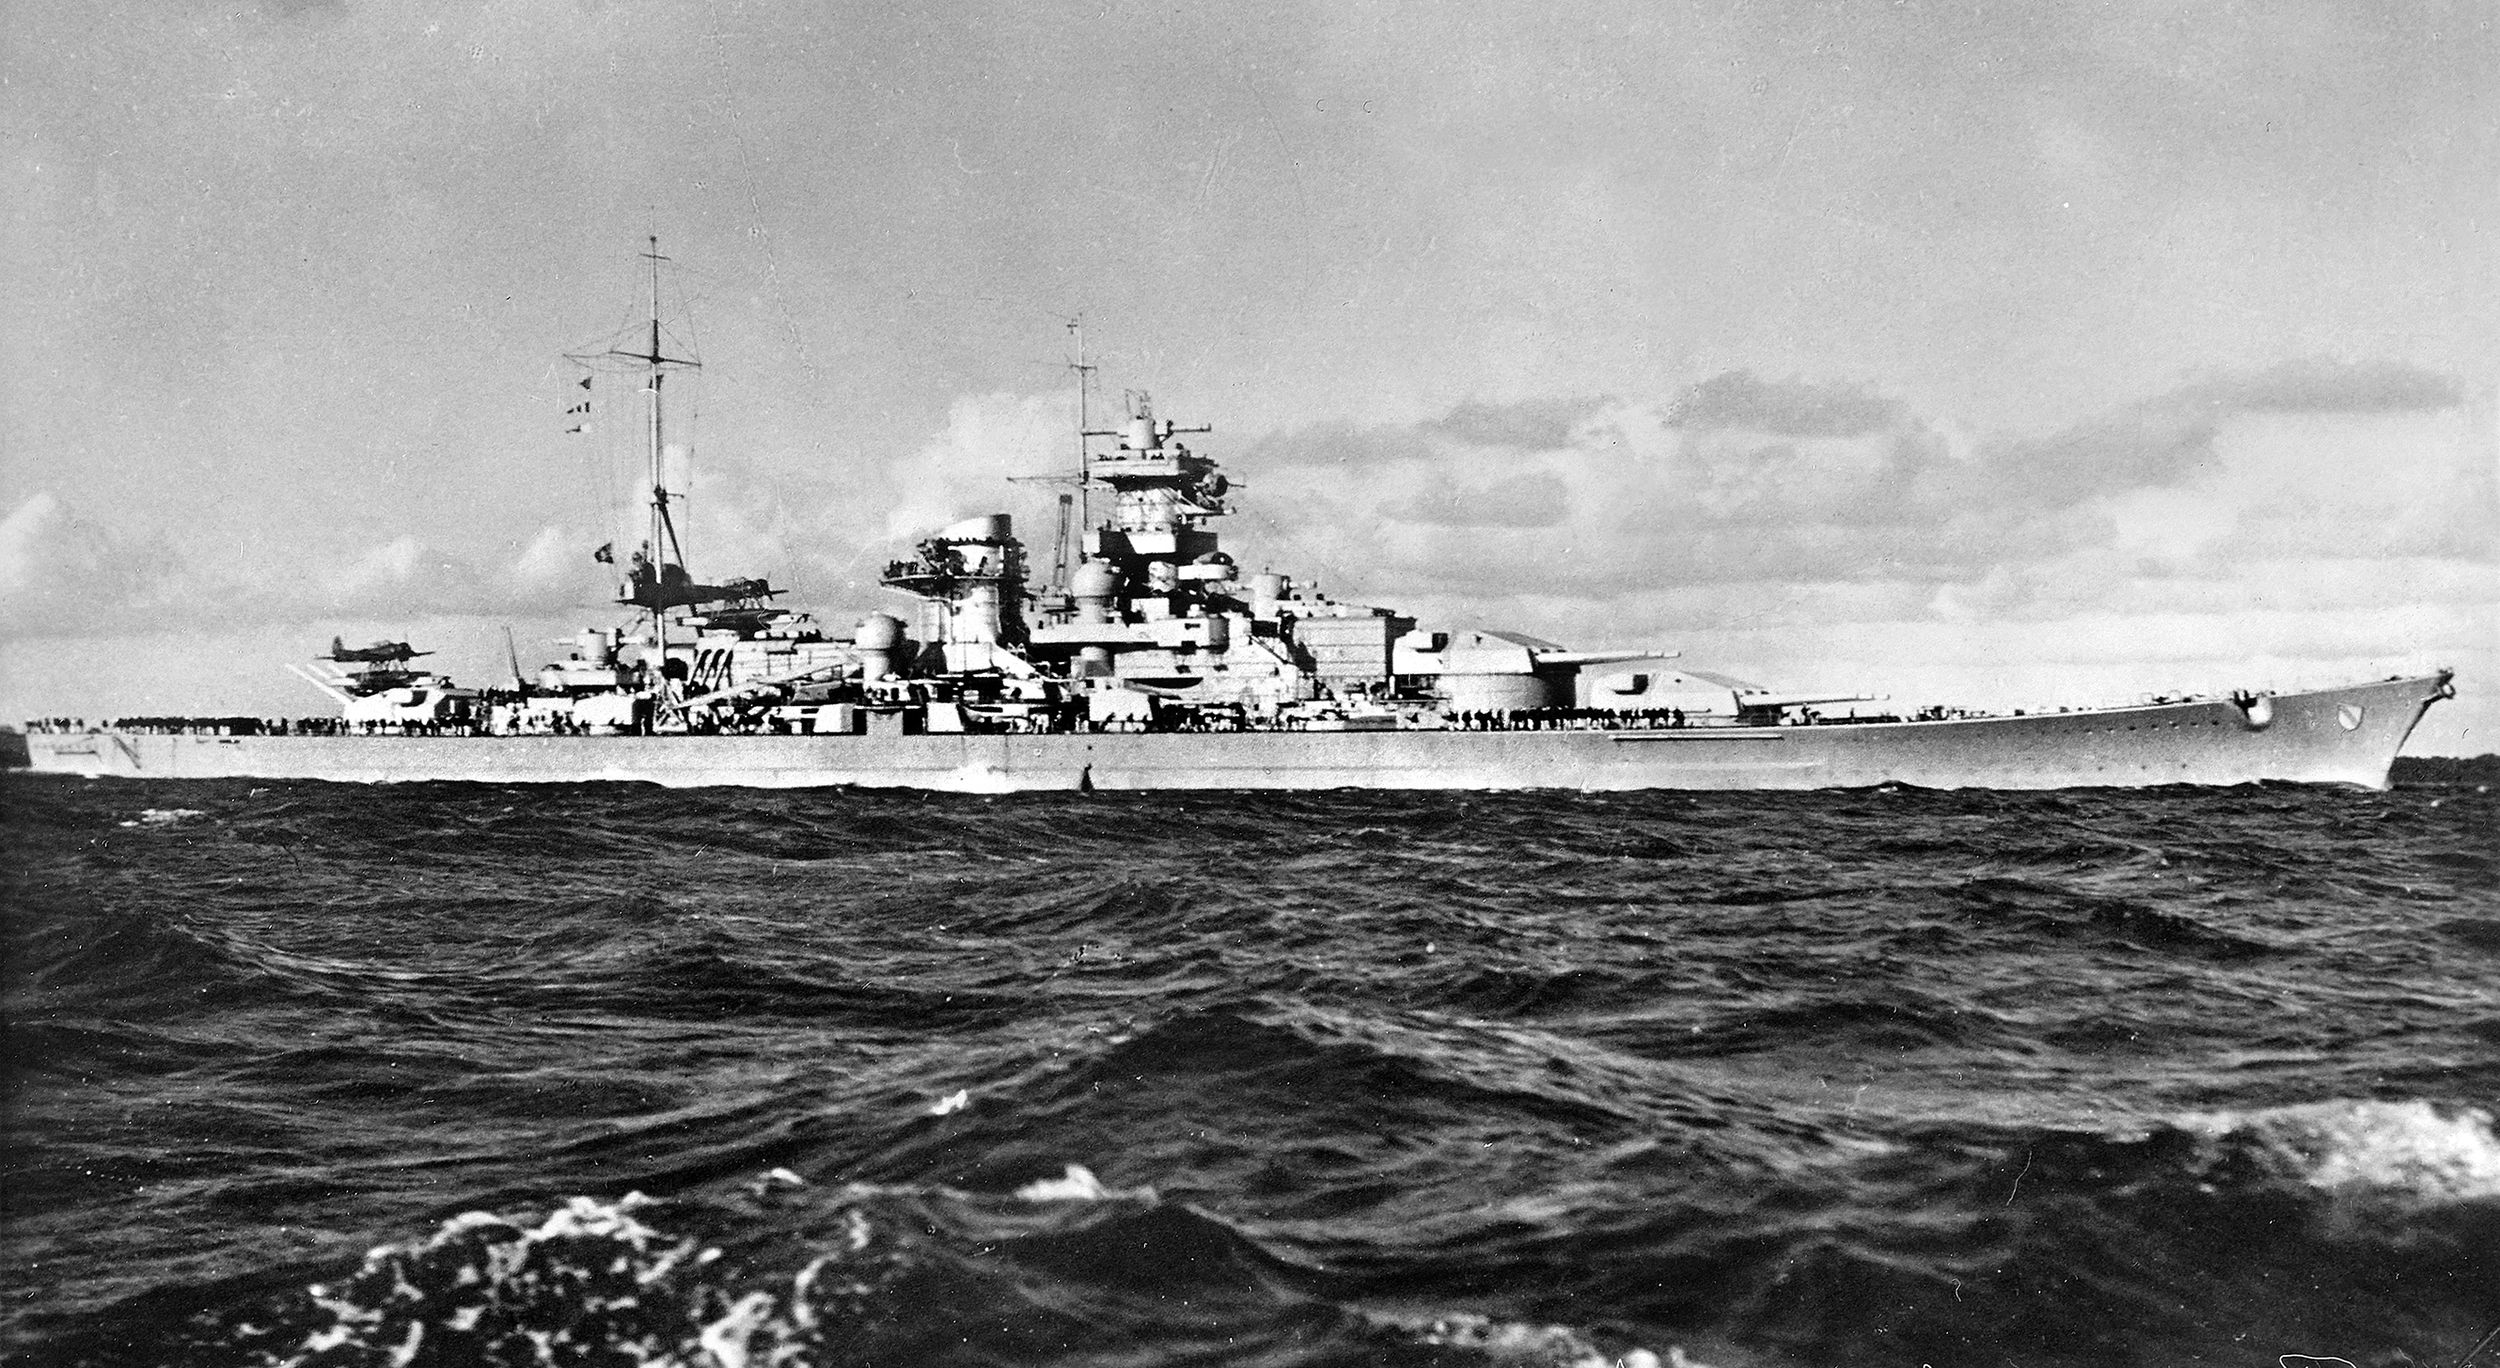 The sleek battlecruiser Scharnhorst is shown at sea during World War II. Scharnhorst and its sister ship Gneisenau both struck mines during Operation Cerberus but completed the dangerous transit of the English Channel in February 1942 without further damage.